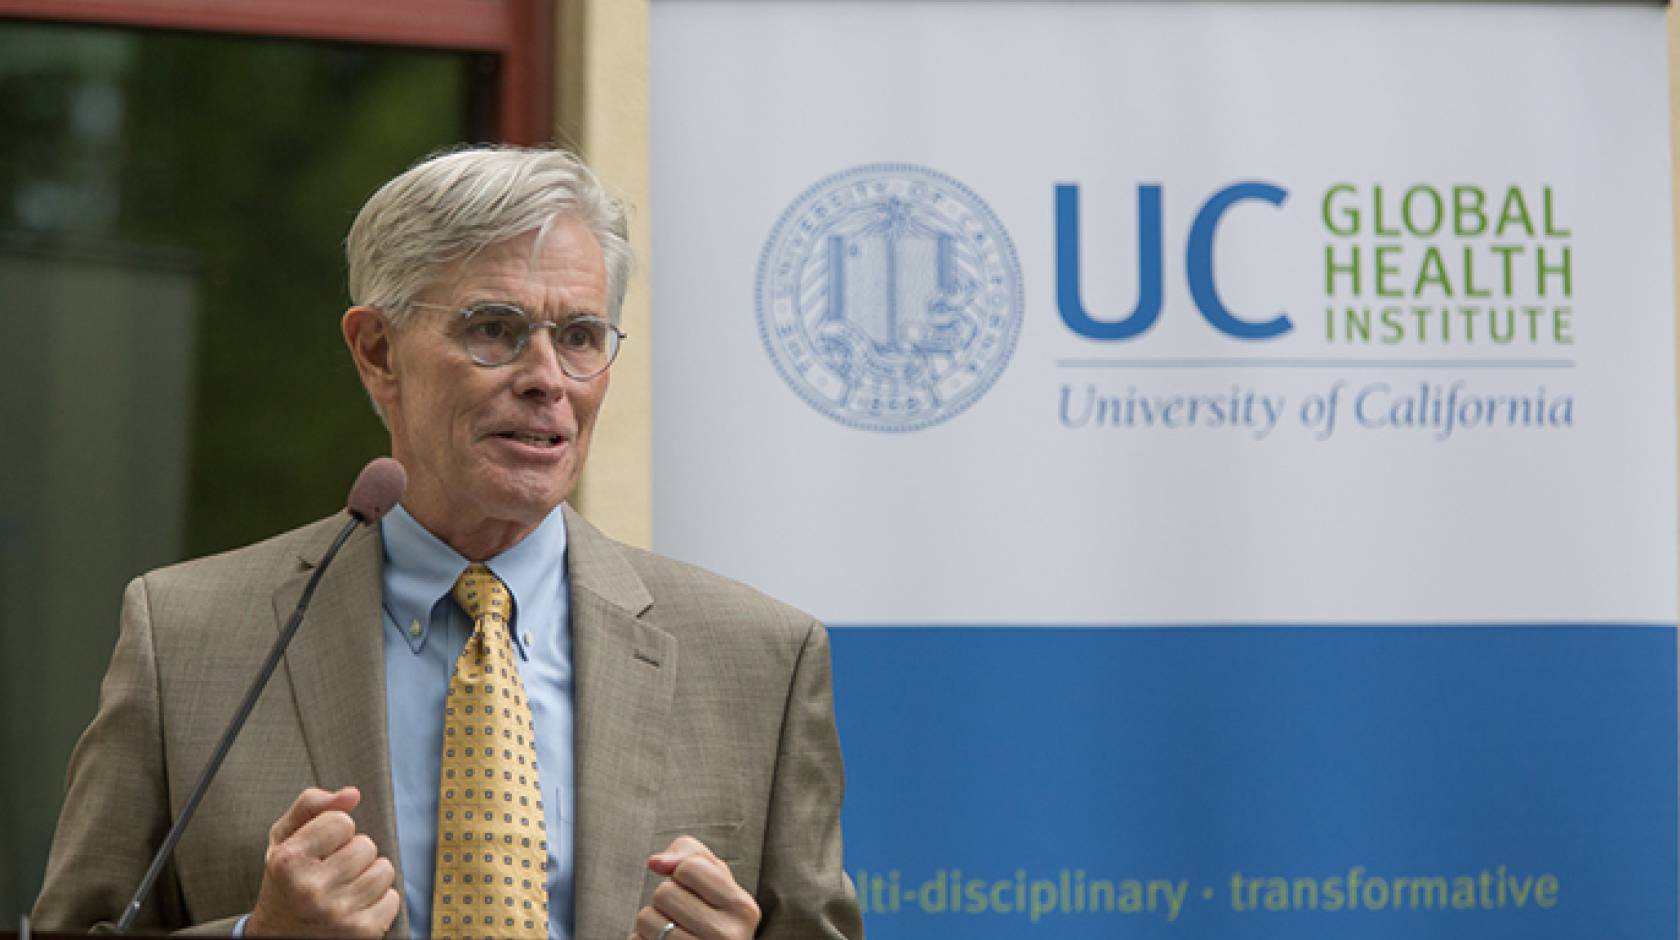 UCLA's Thomas Coates has been named director of the UC Global Health Institute.